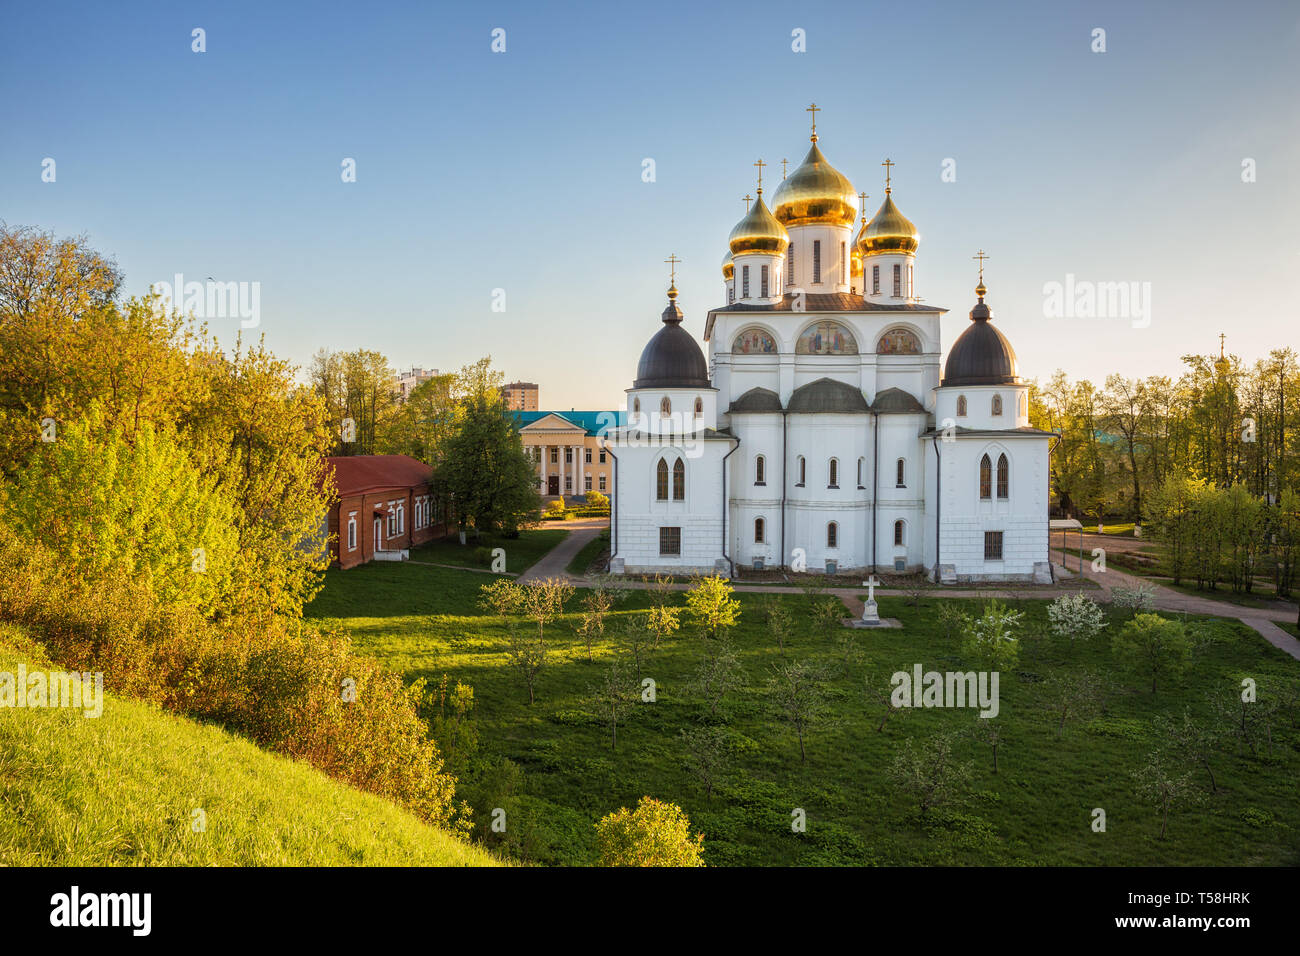 Old Assumption Cathedral (early 16th century) in the Dmitrov Kremlin, view from the ramparts. Dmitrov, Moscow region, Russia Stock Photo